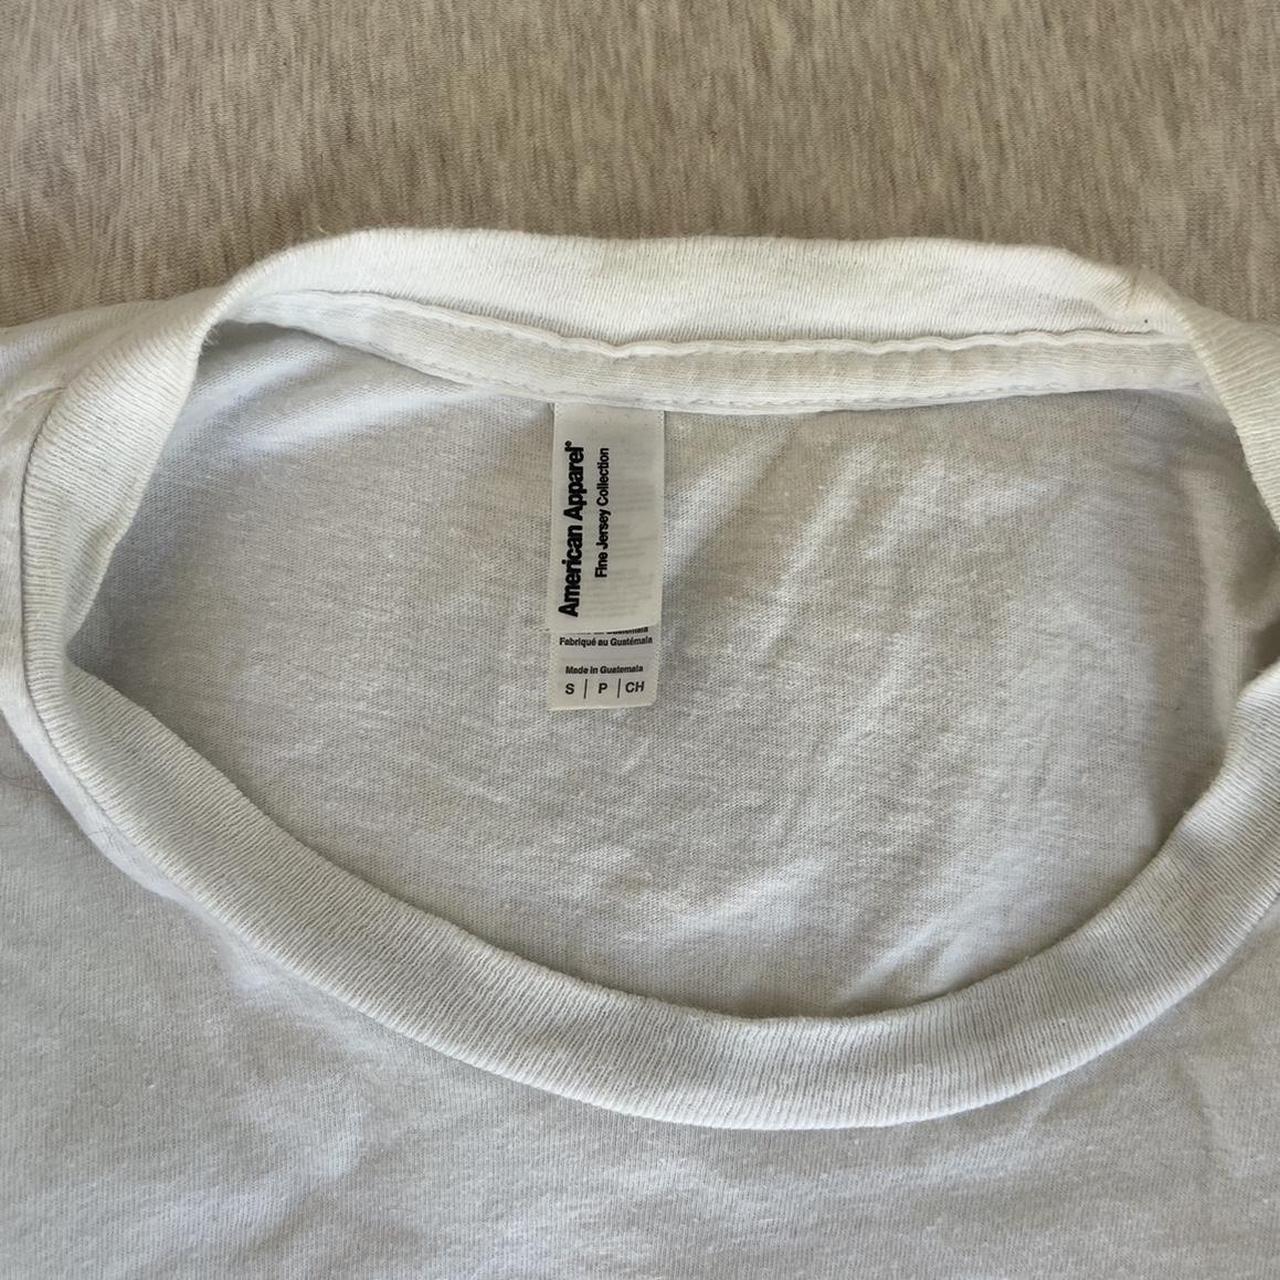 American Apparel Women's Black and White T-shirt (5)